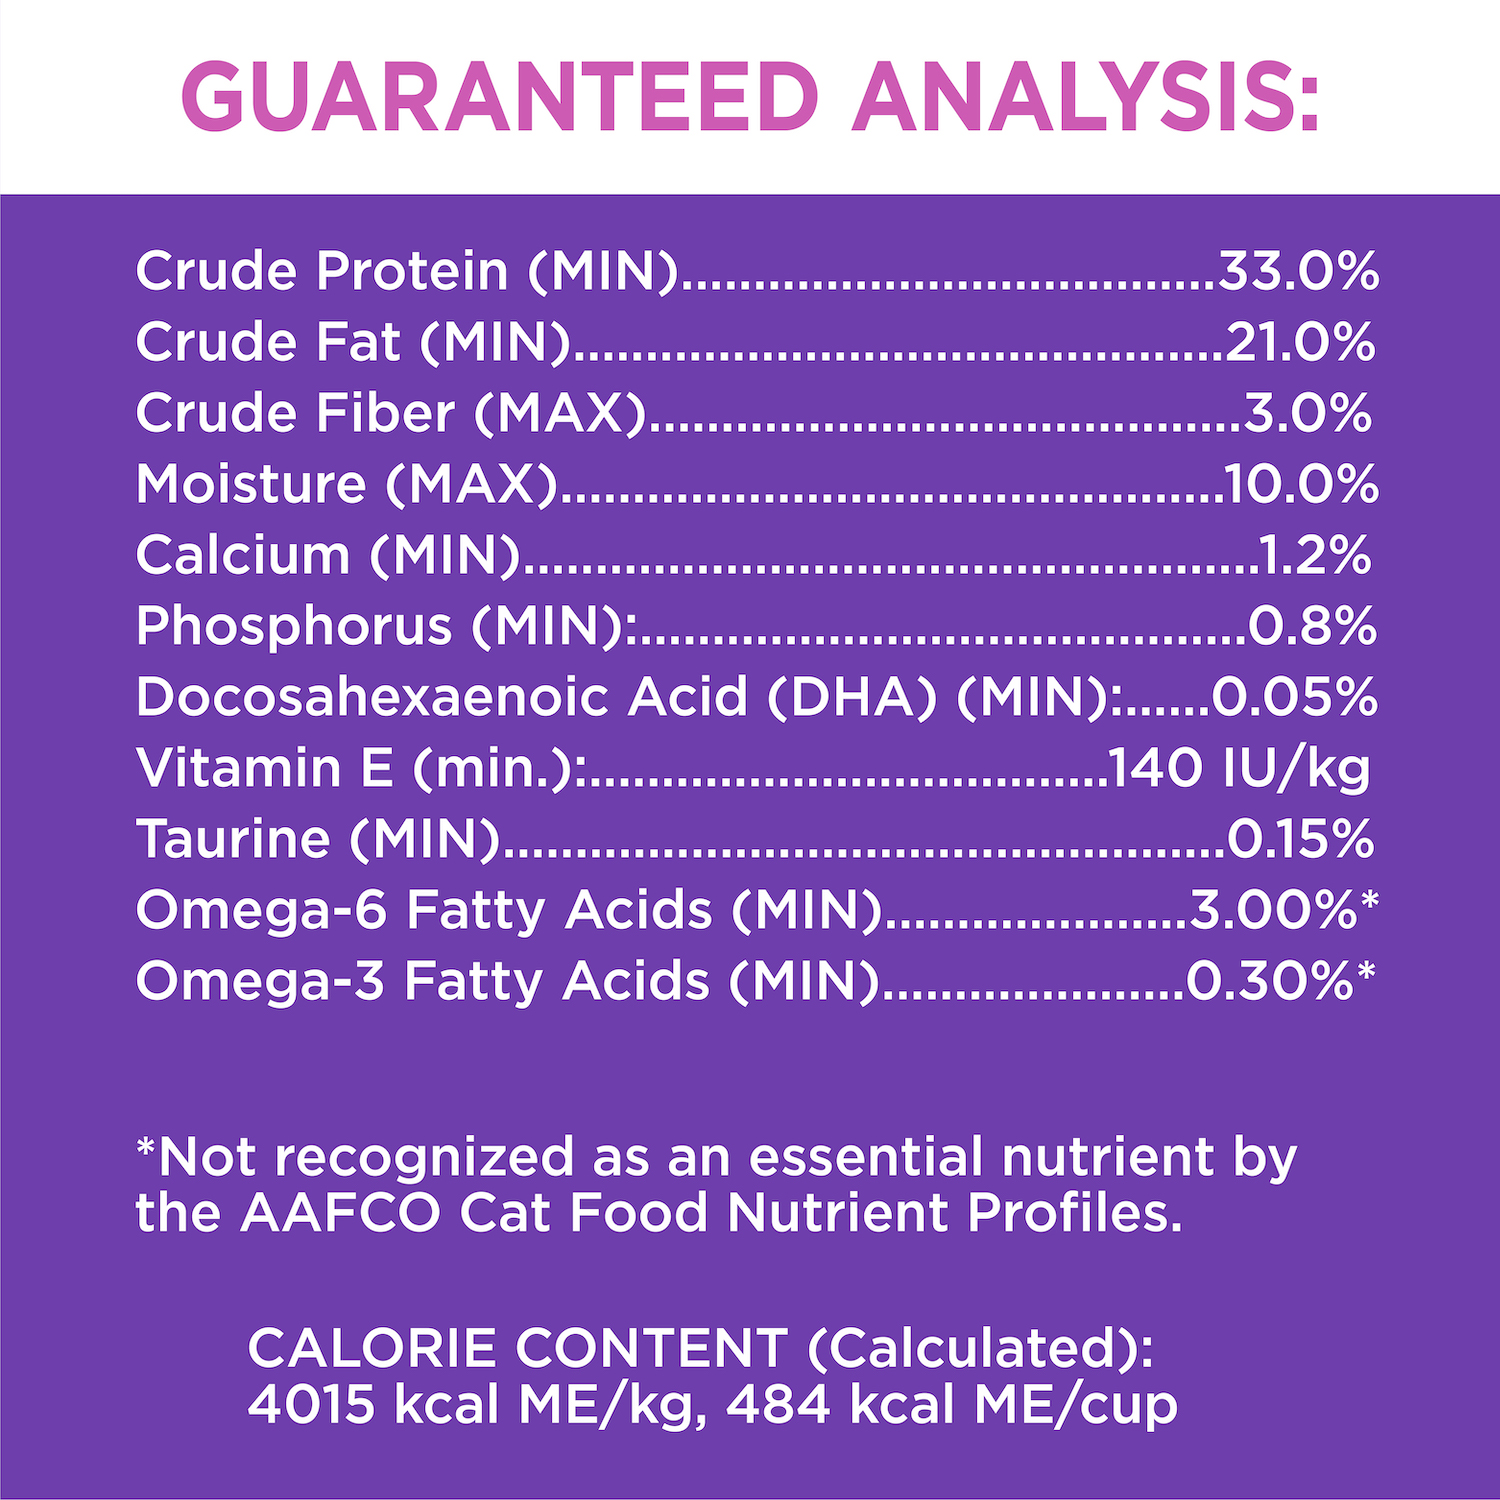 IAMS™ Healthy Kitten Dry Cat Food with Chicken guaranteed analysis image